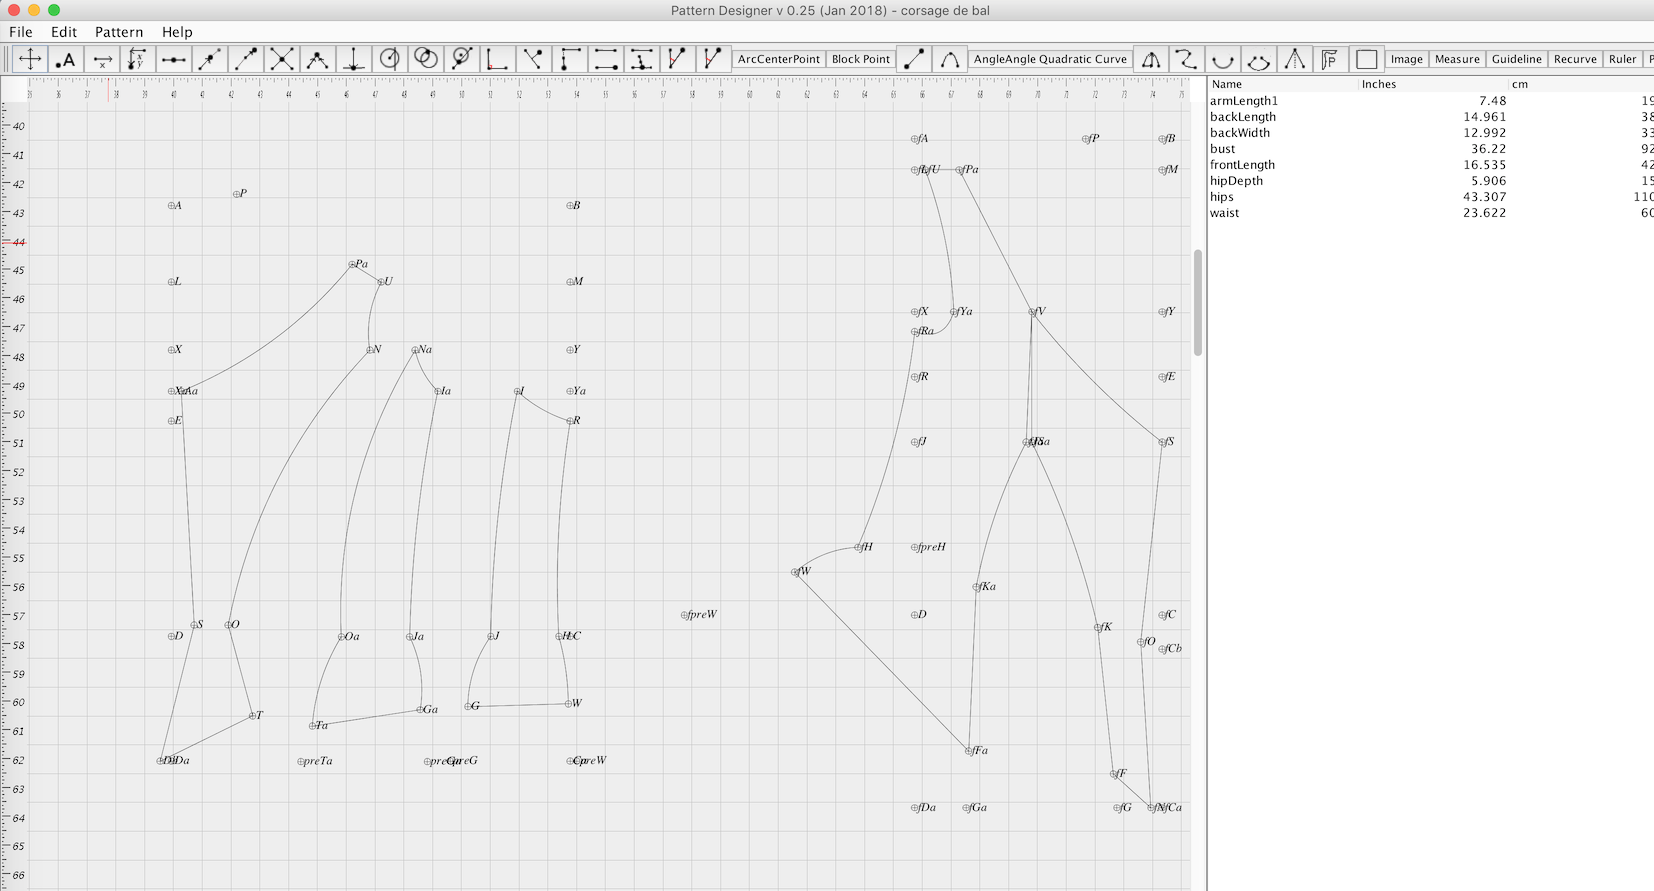 screenshot of patterndesigner, a pattern editor implemented in Swing